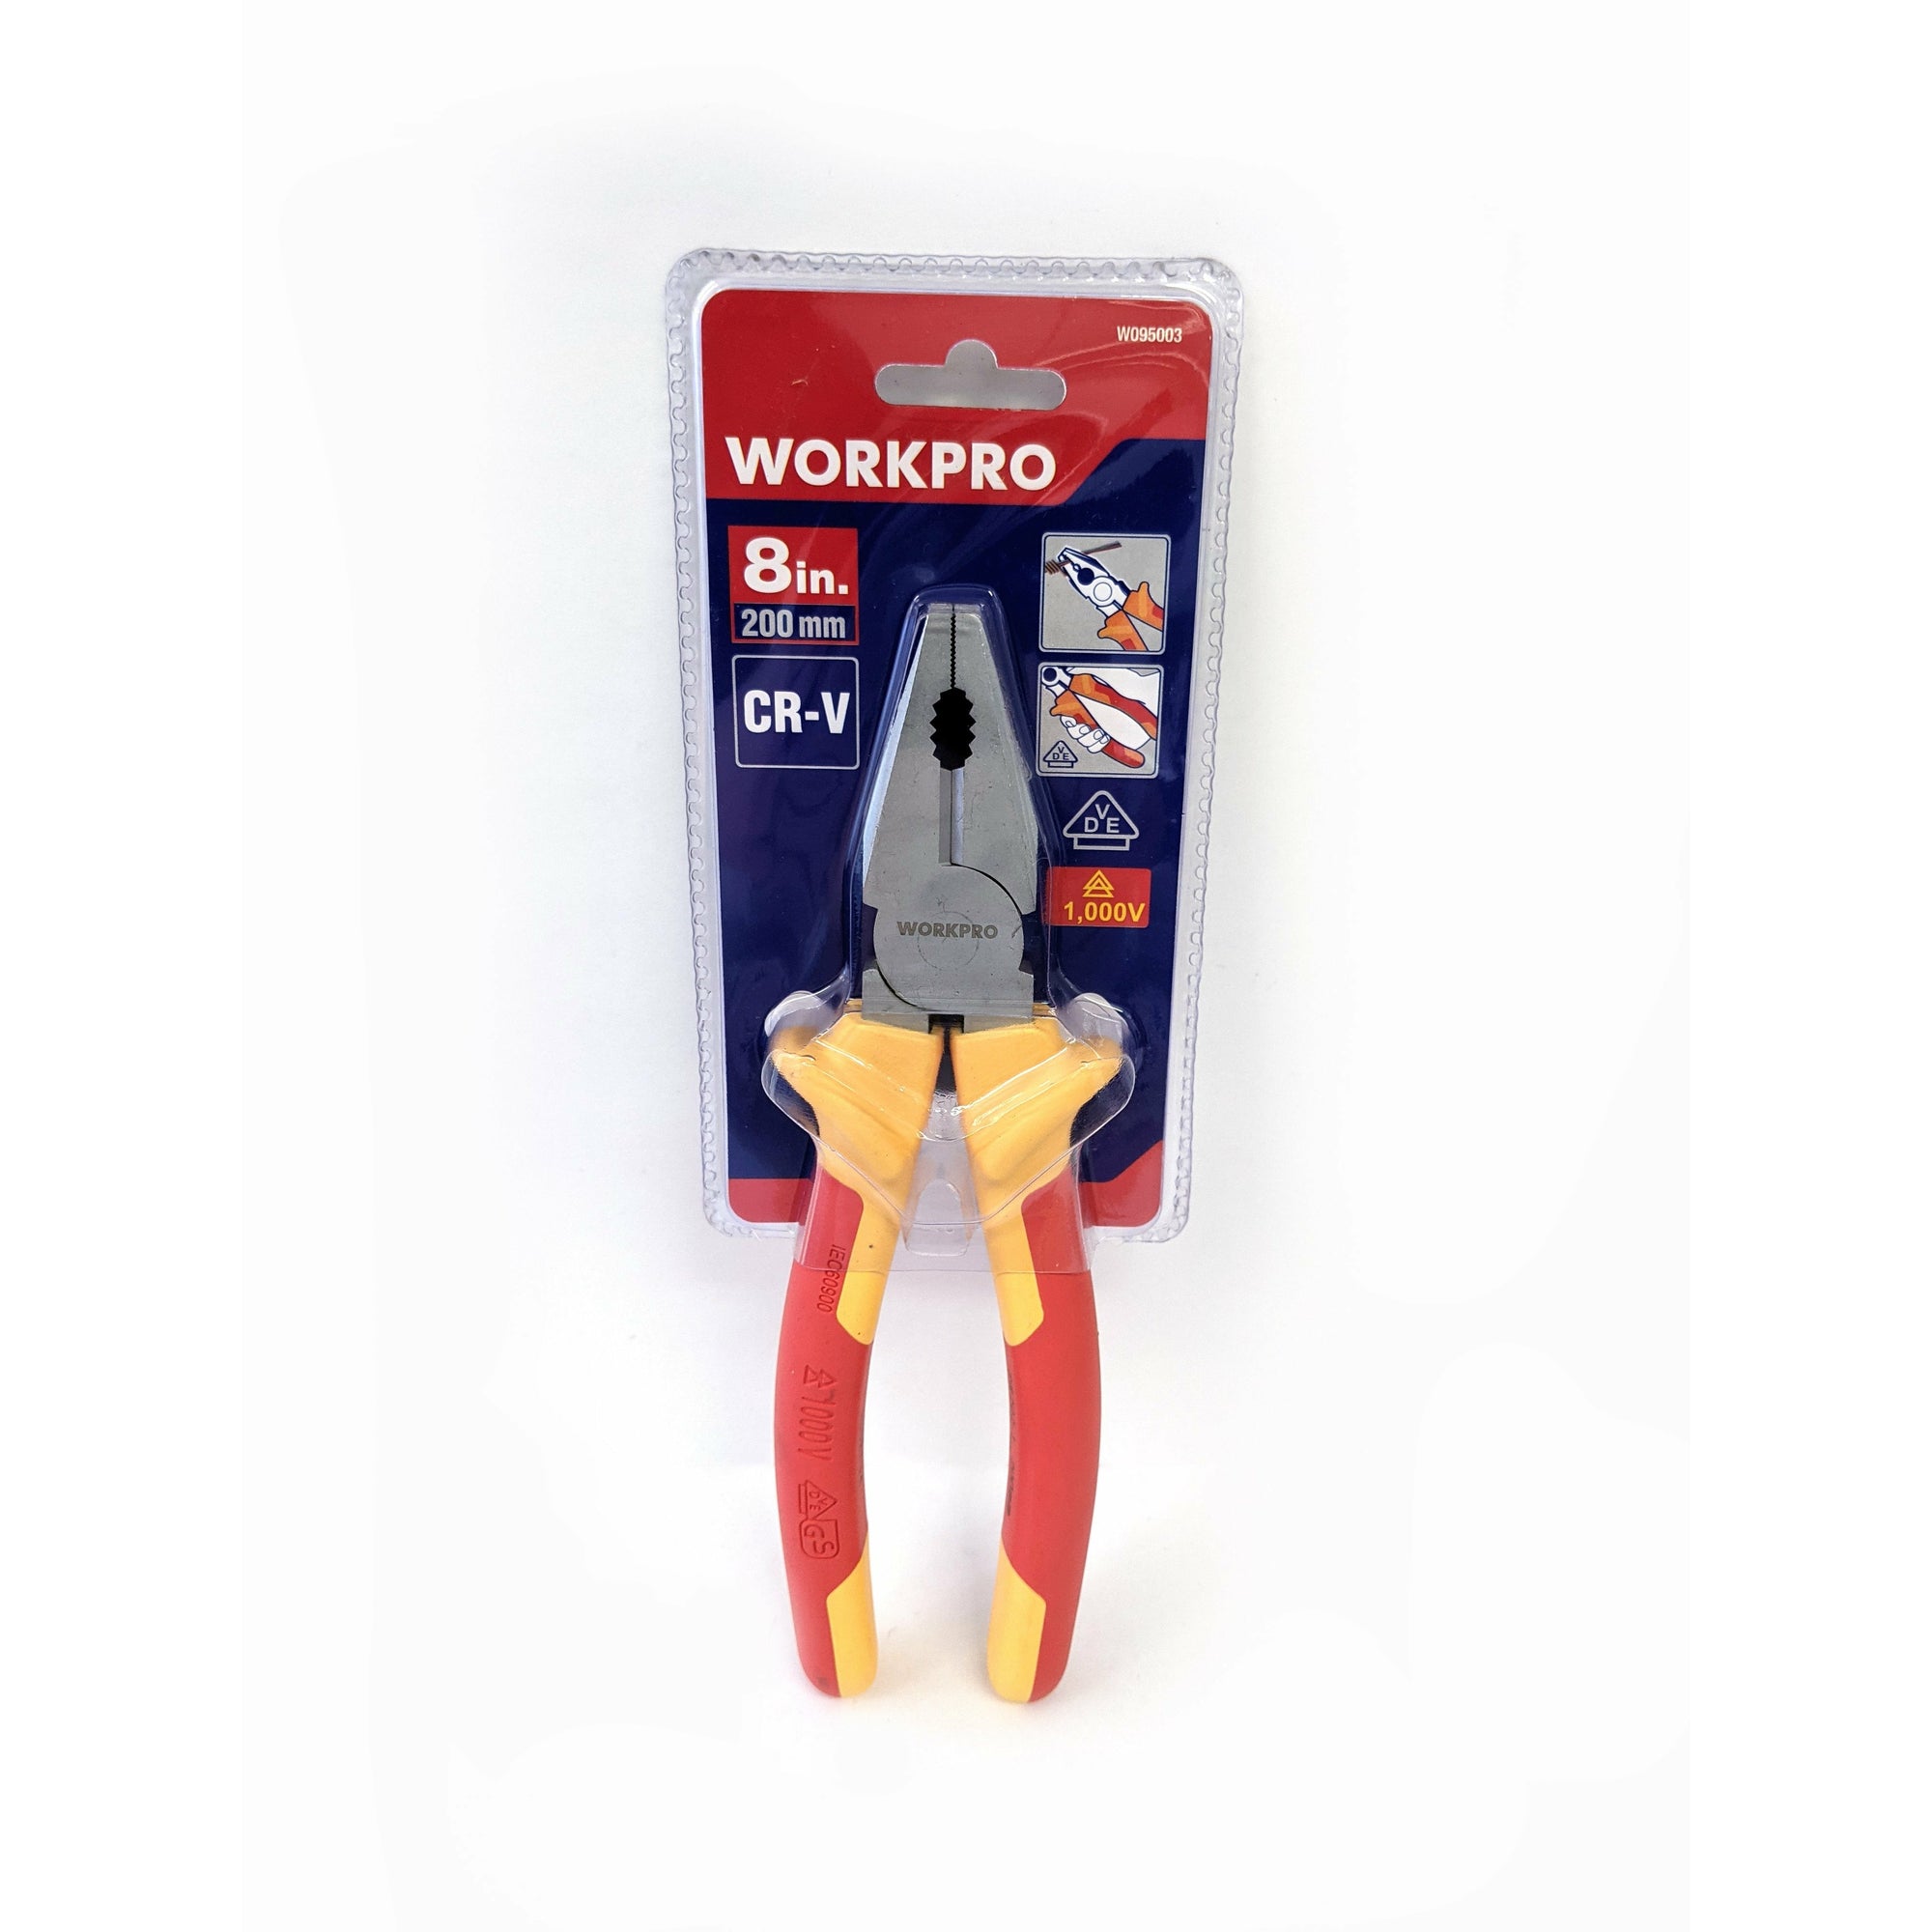 Workpro Vde Insulated Linesman Pliers